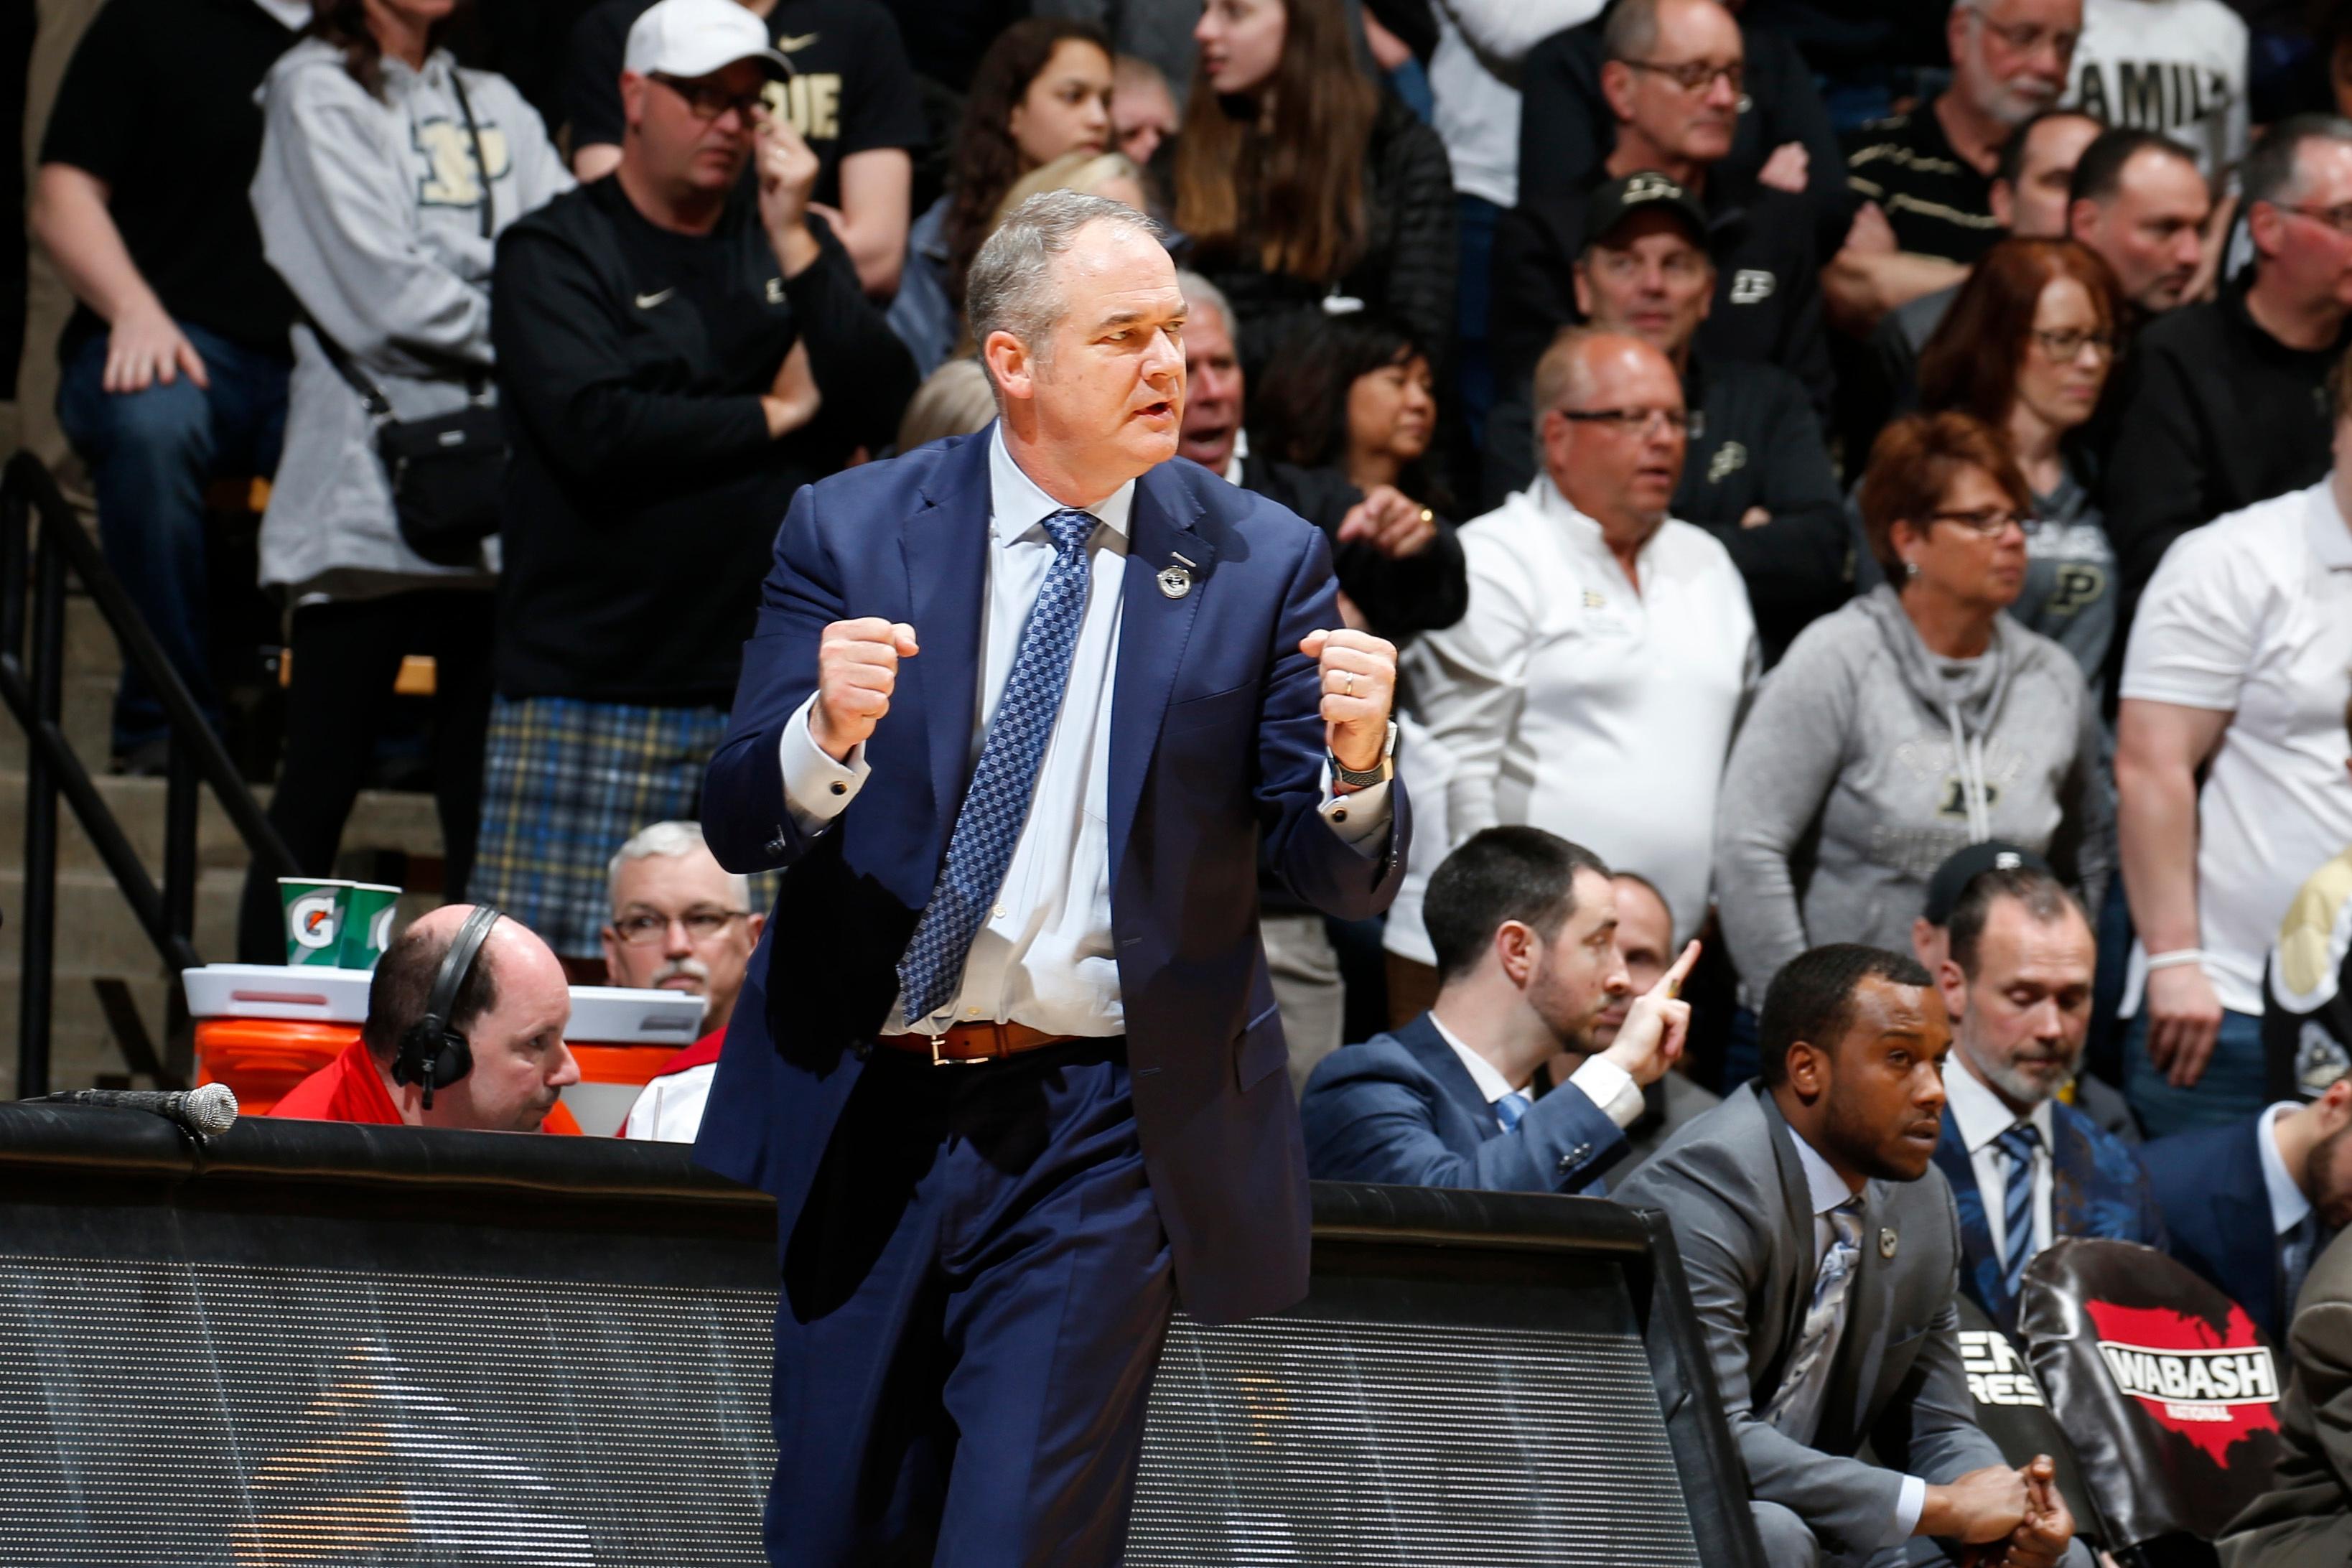 Mar 7, 2020; West Lafayette, Indiana, USA; Rutgers Scarlet Knights coach Steve Pikiell coaches on the sidelines against the Purdue Boilermakers during the second half at Mackey Arena. Mandatory Credit: Brian Spurlock-USA TODAY Sports / © Brian Spurlock-USA TODAY Sports